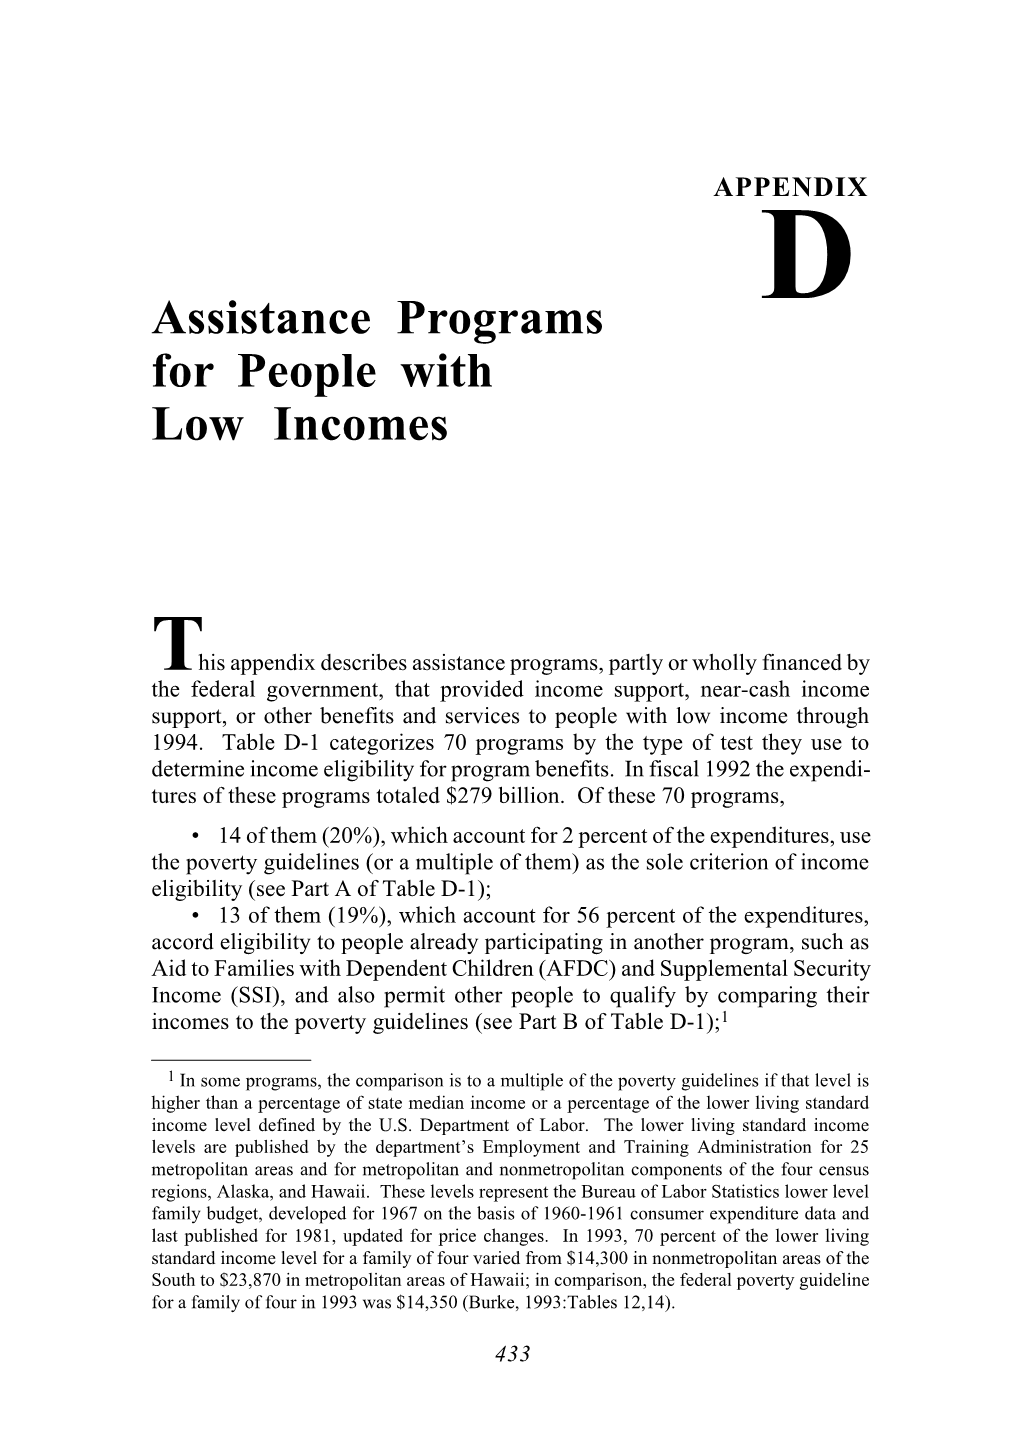 Appendix D. Assistance Programs for People with Low Incomes